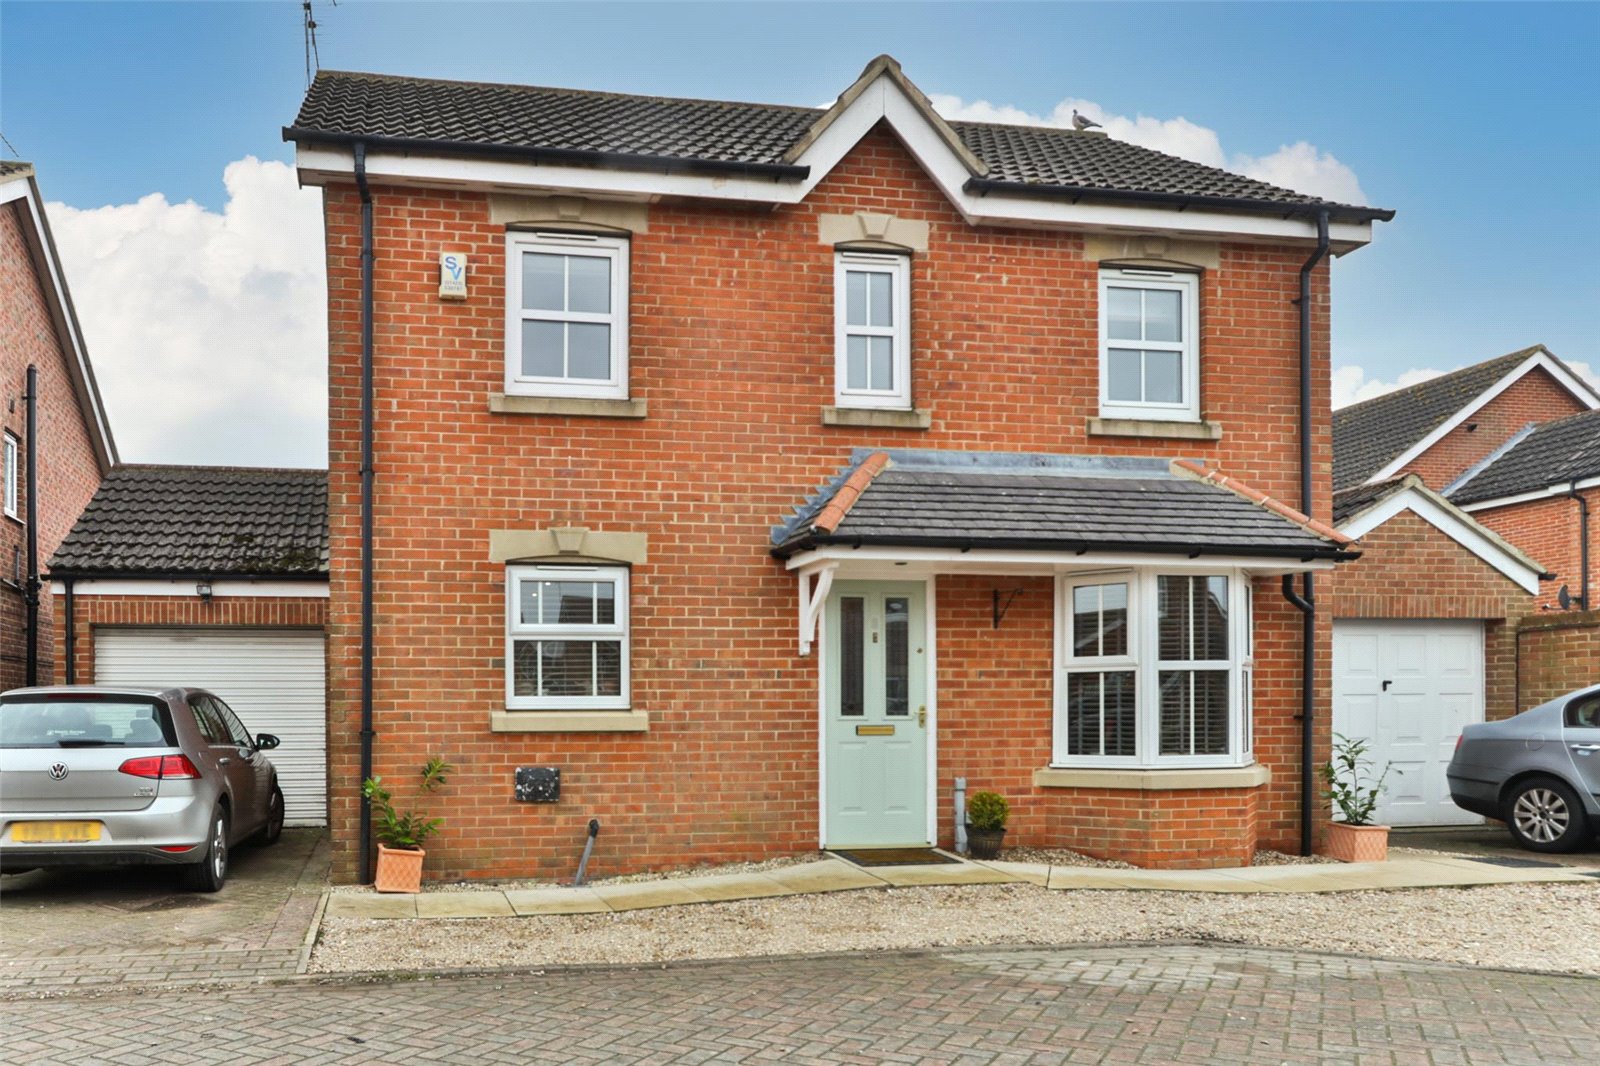 4 bed house for sale in Appletree Close, Long Riston  - Property Image 1